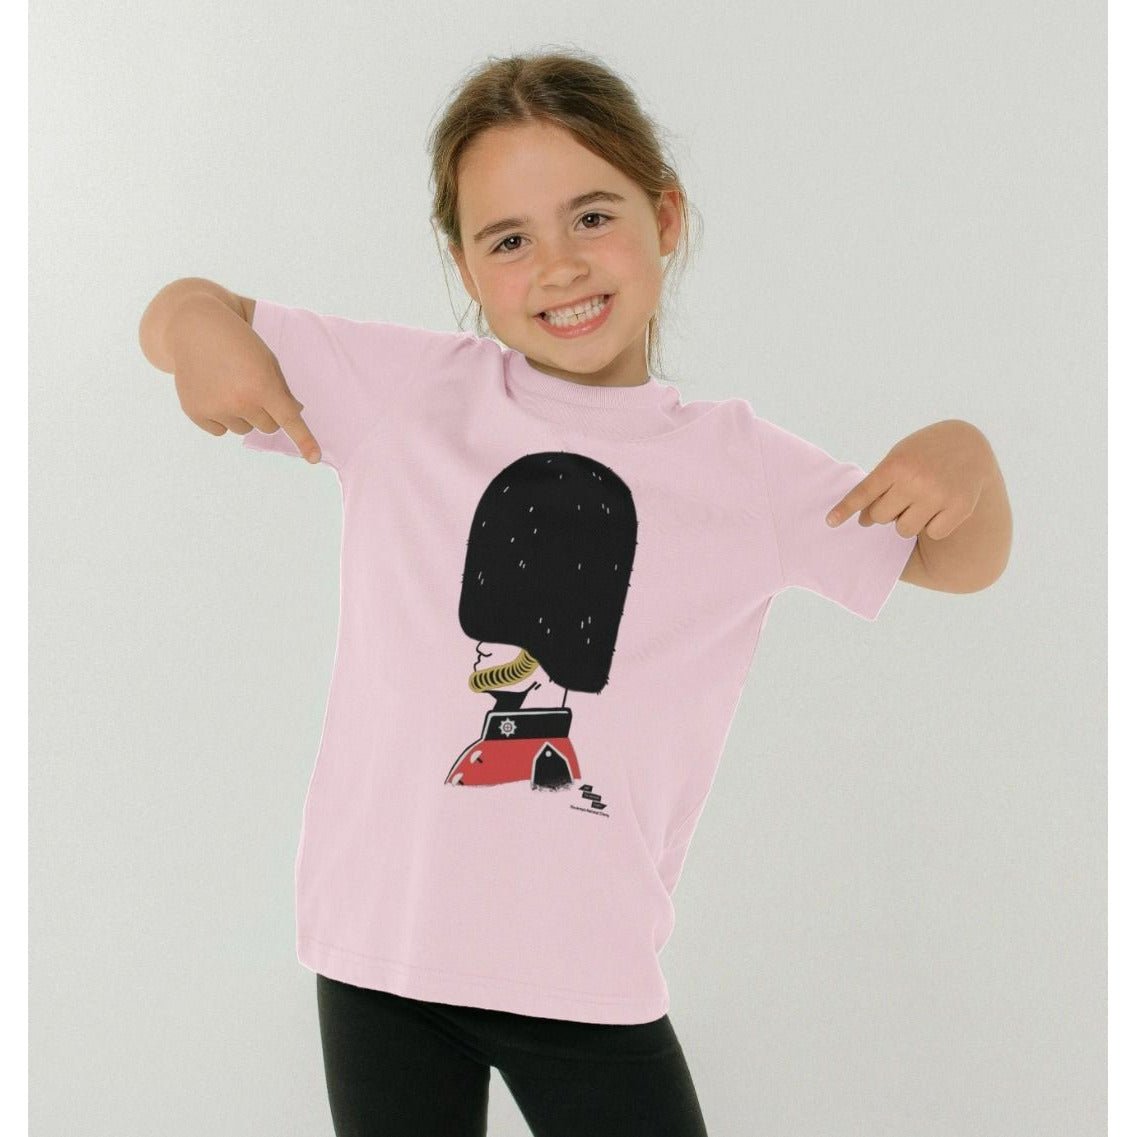 Platinum Jubilee Kids T-shirt - pink Printed Kids T-Shirt ABF The Soldiers Charity 